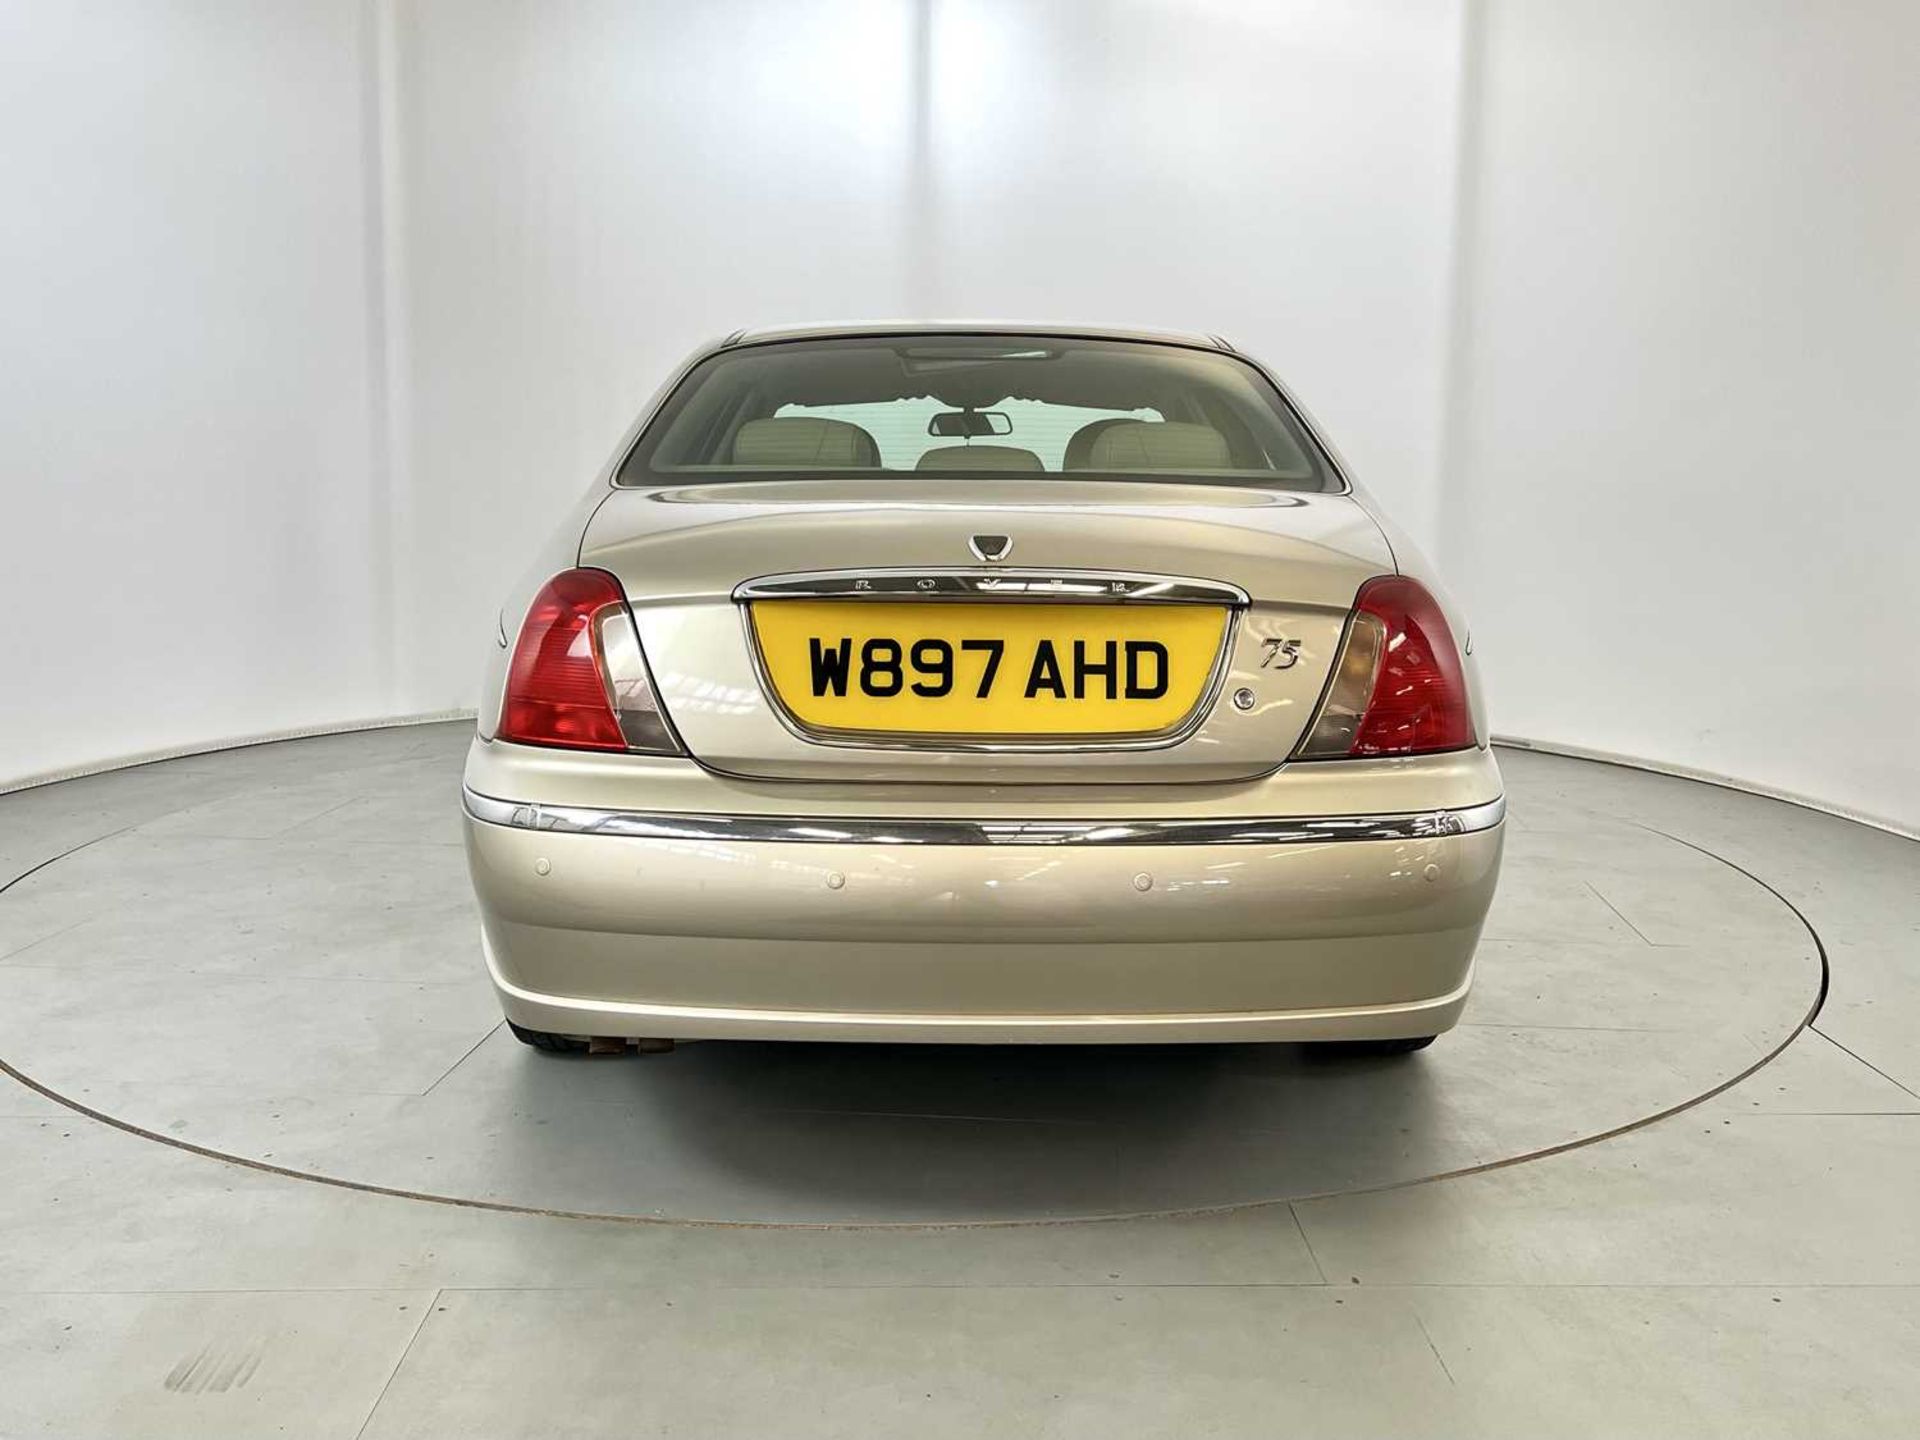 2000 Rover 75 Connoisseur - Image 8 of 34